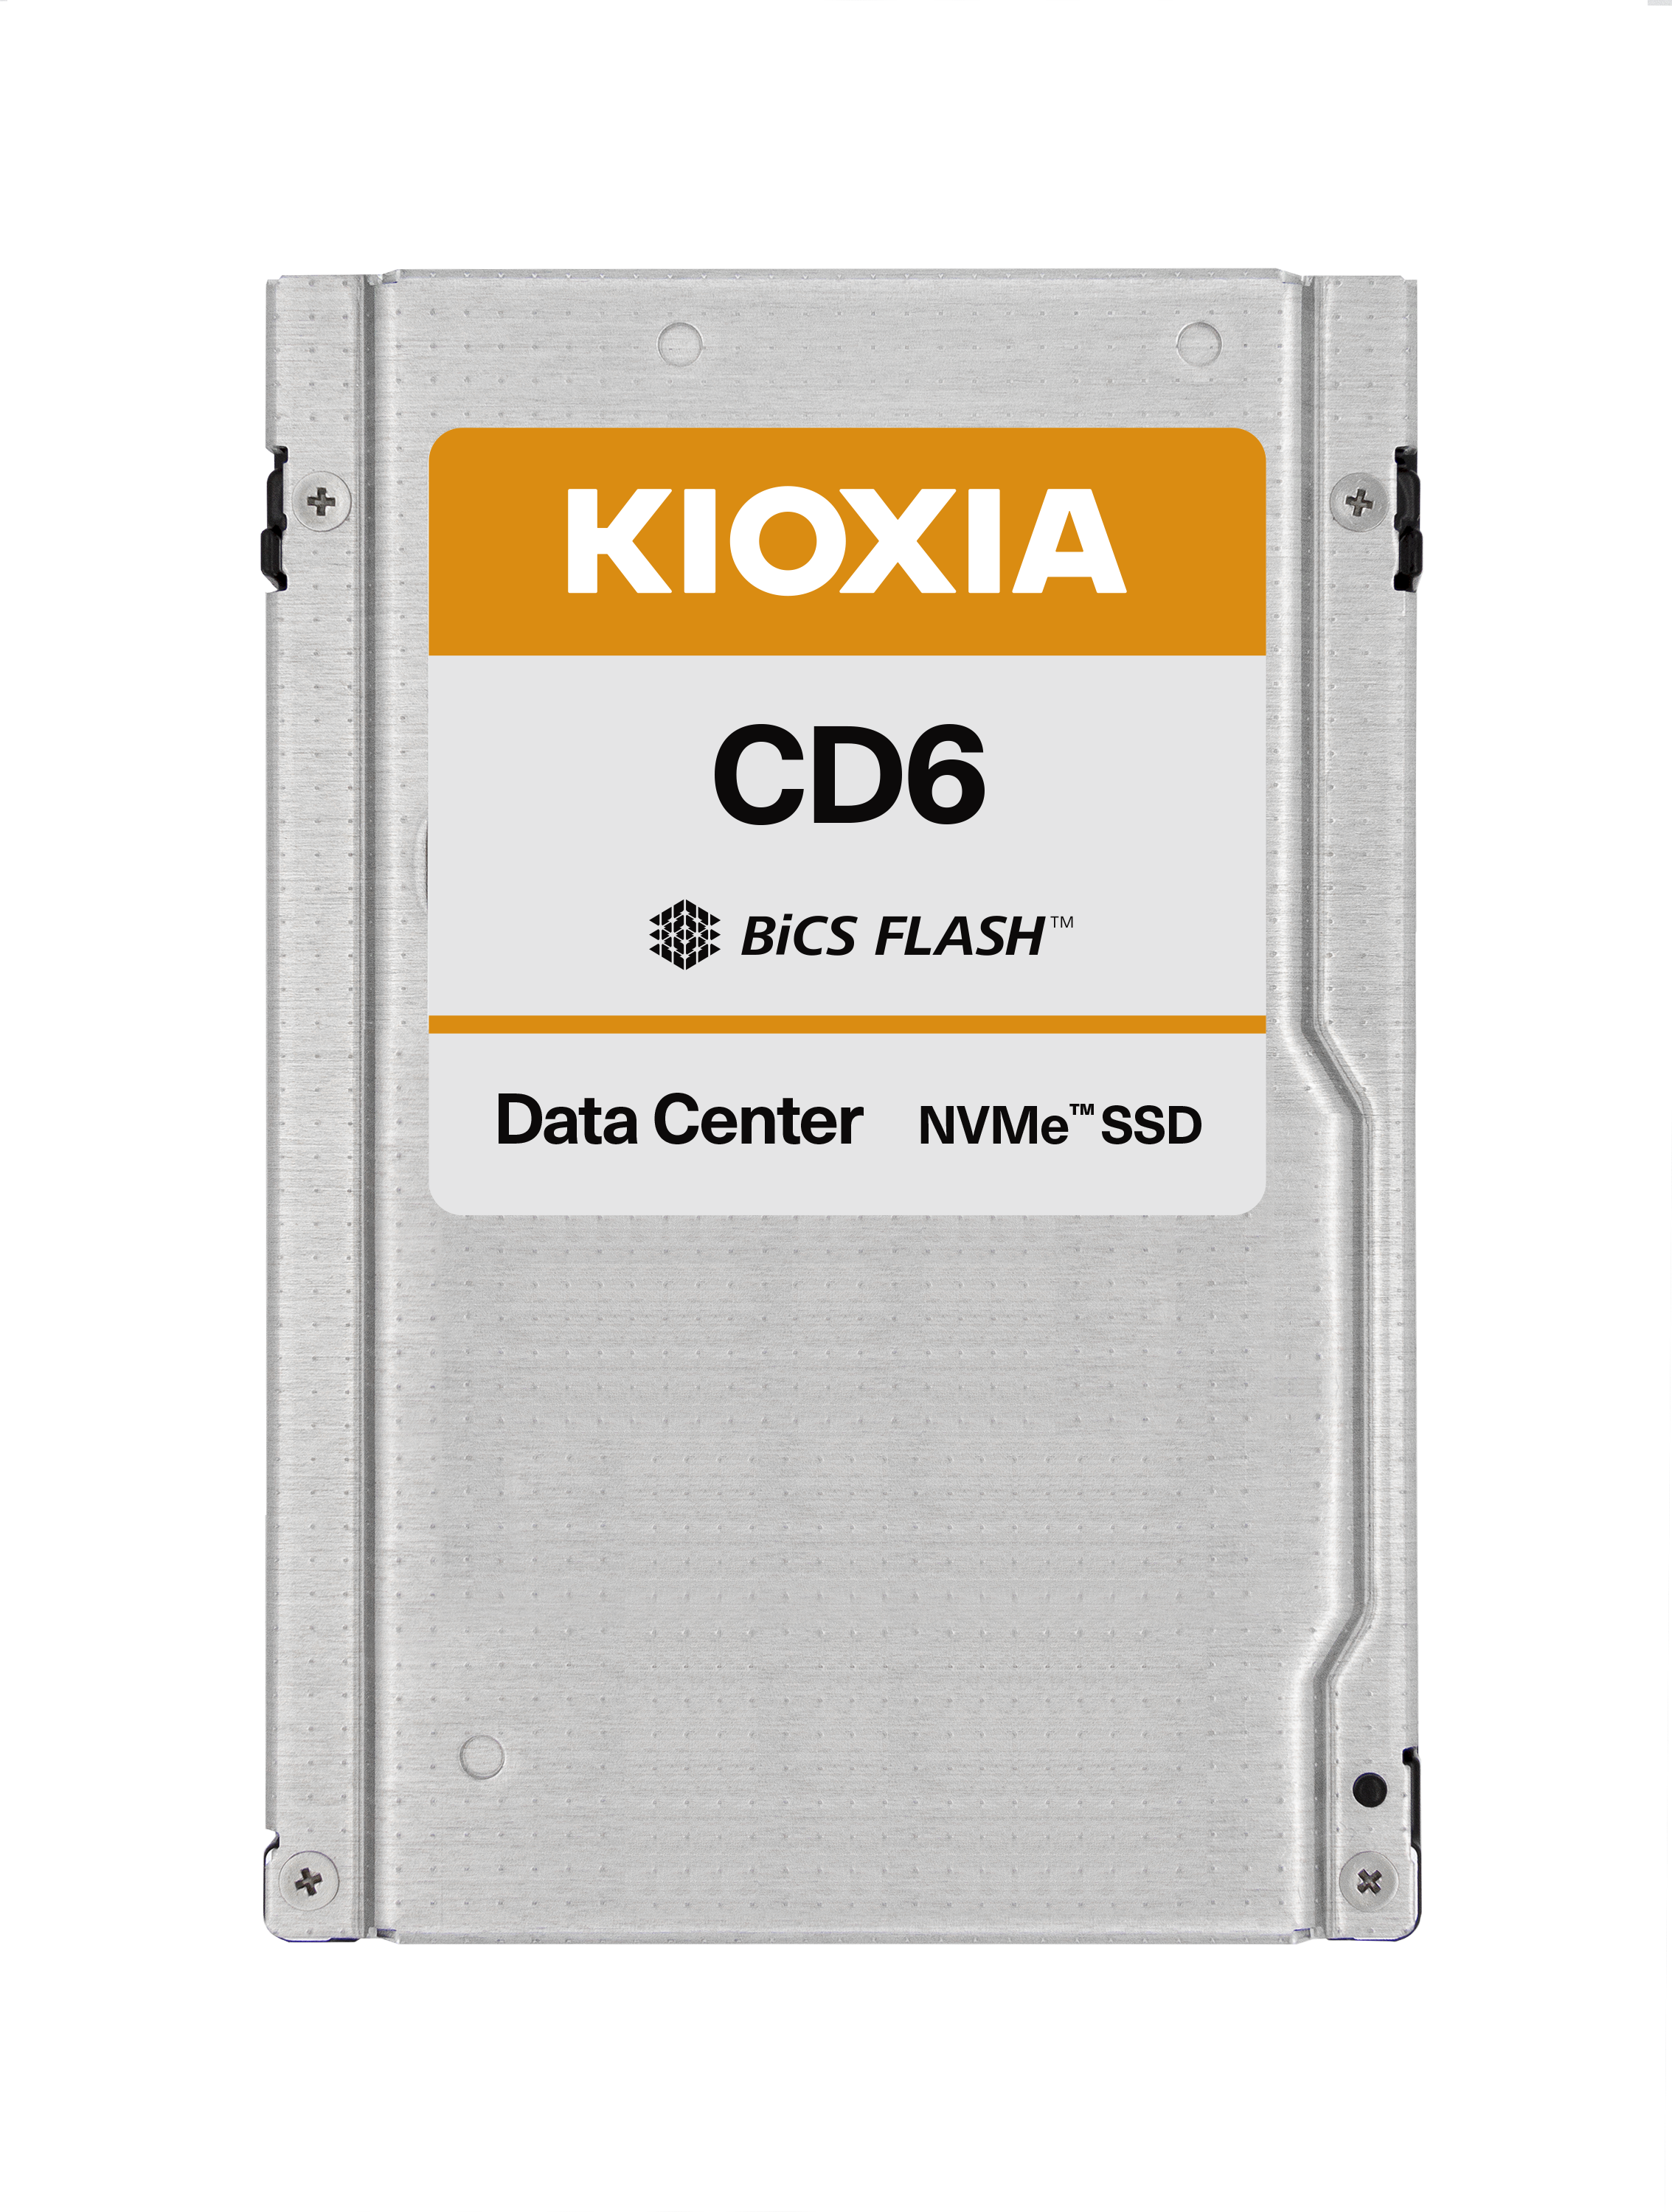 Kioxia CD6 KCD61LUL15T3 15.36TB PCIe Gen 4.0 x4 8GB/s 2.5" Read Intensive Solid State Drive